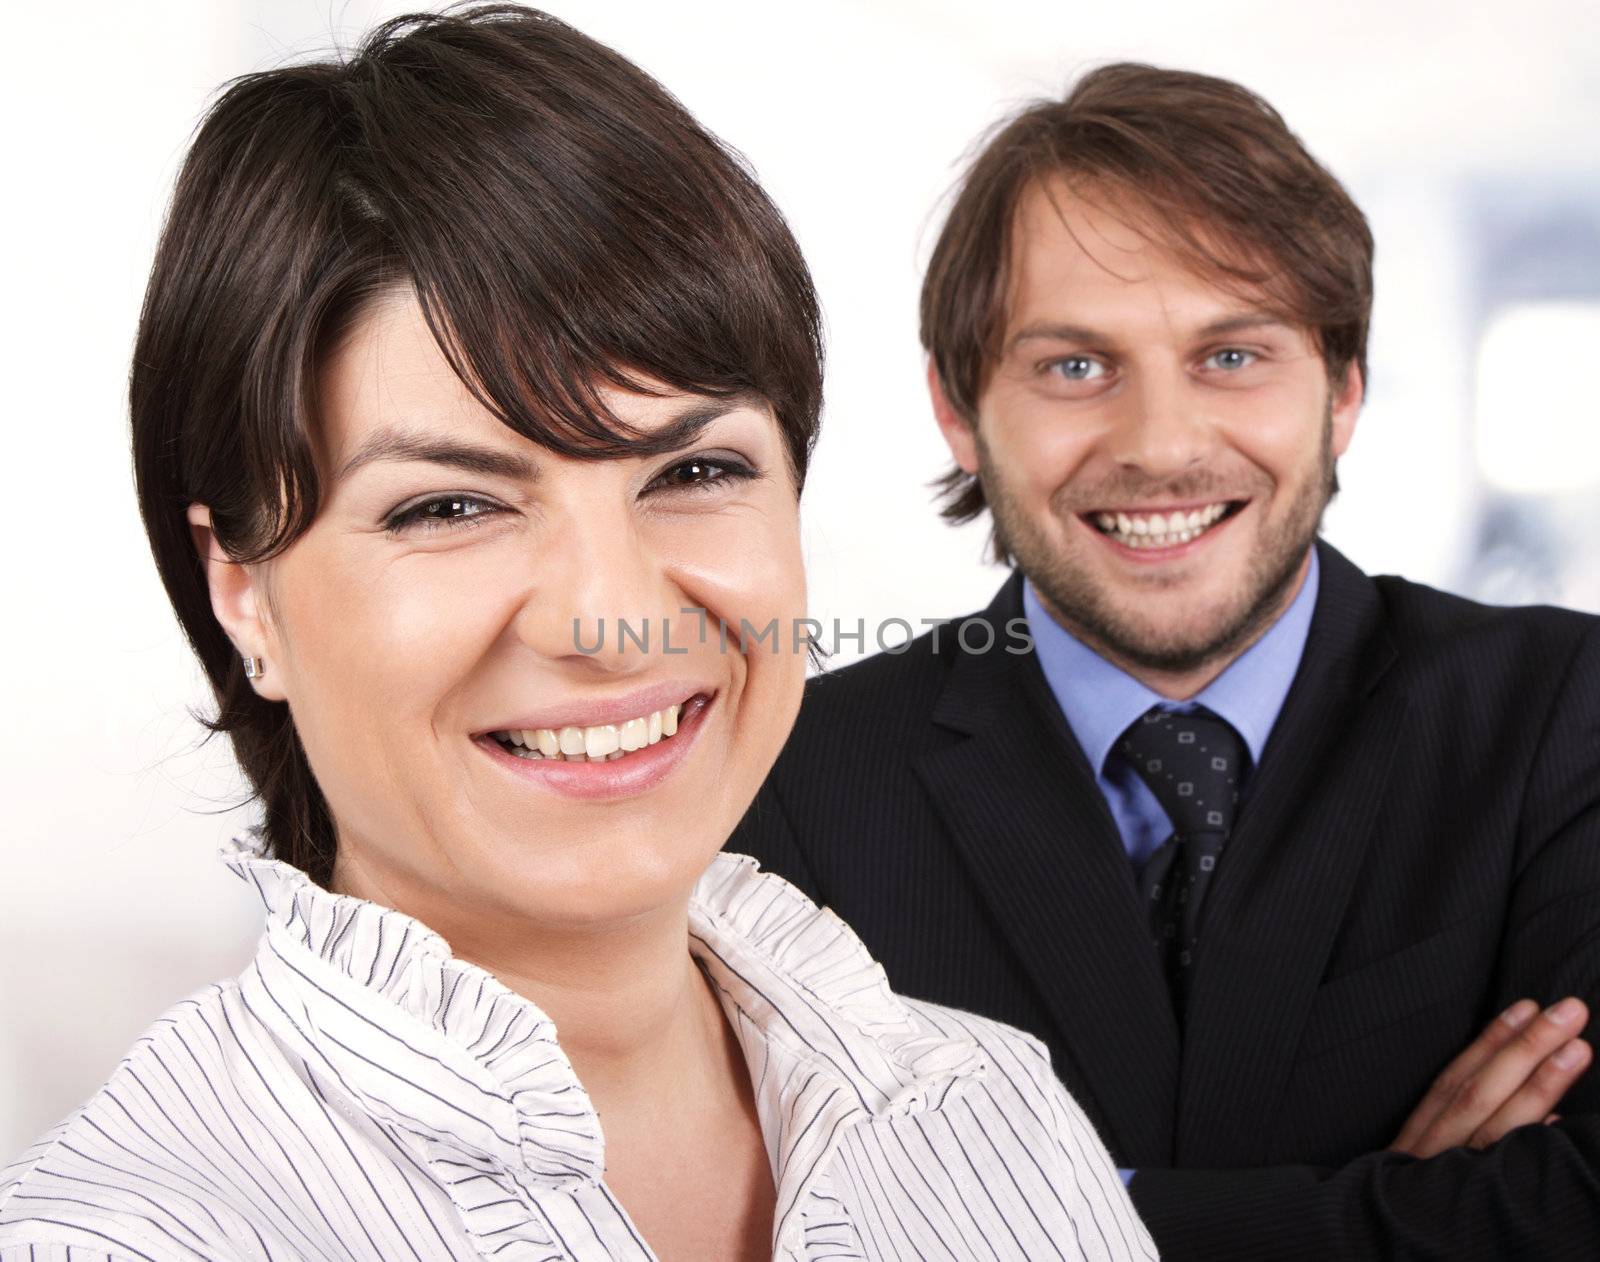 smiling business people. female infront of a male